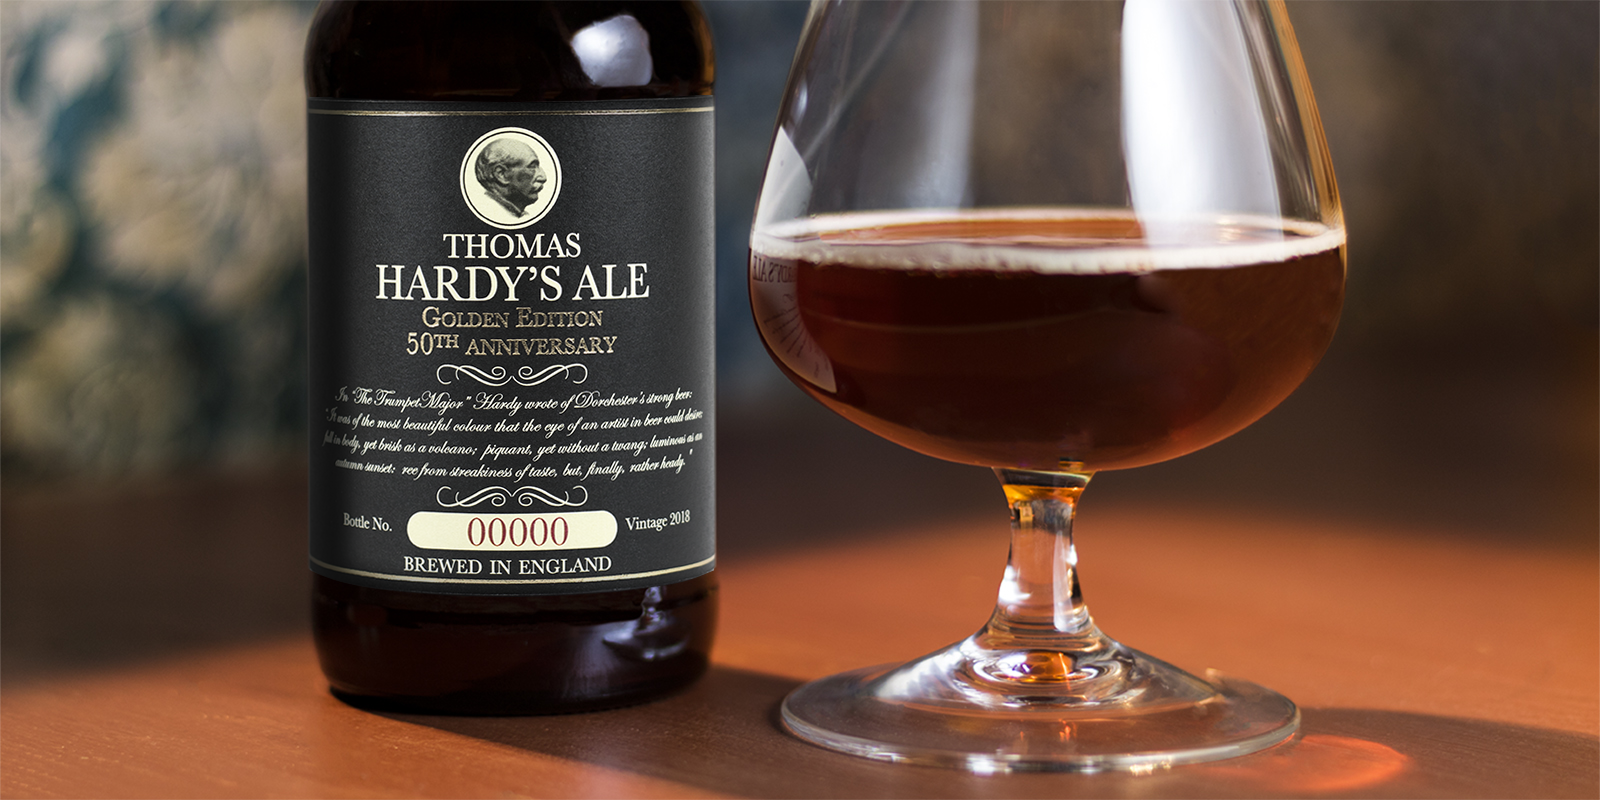 Thomas Hardy’s Ale is back home